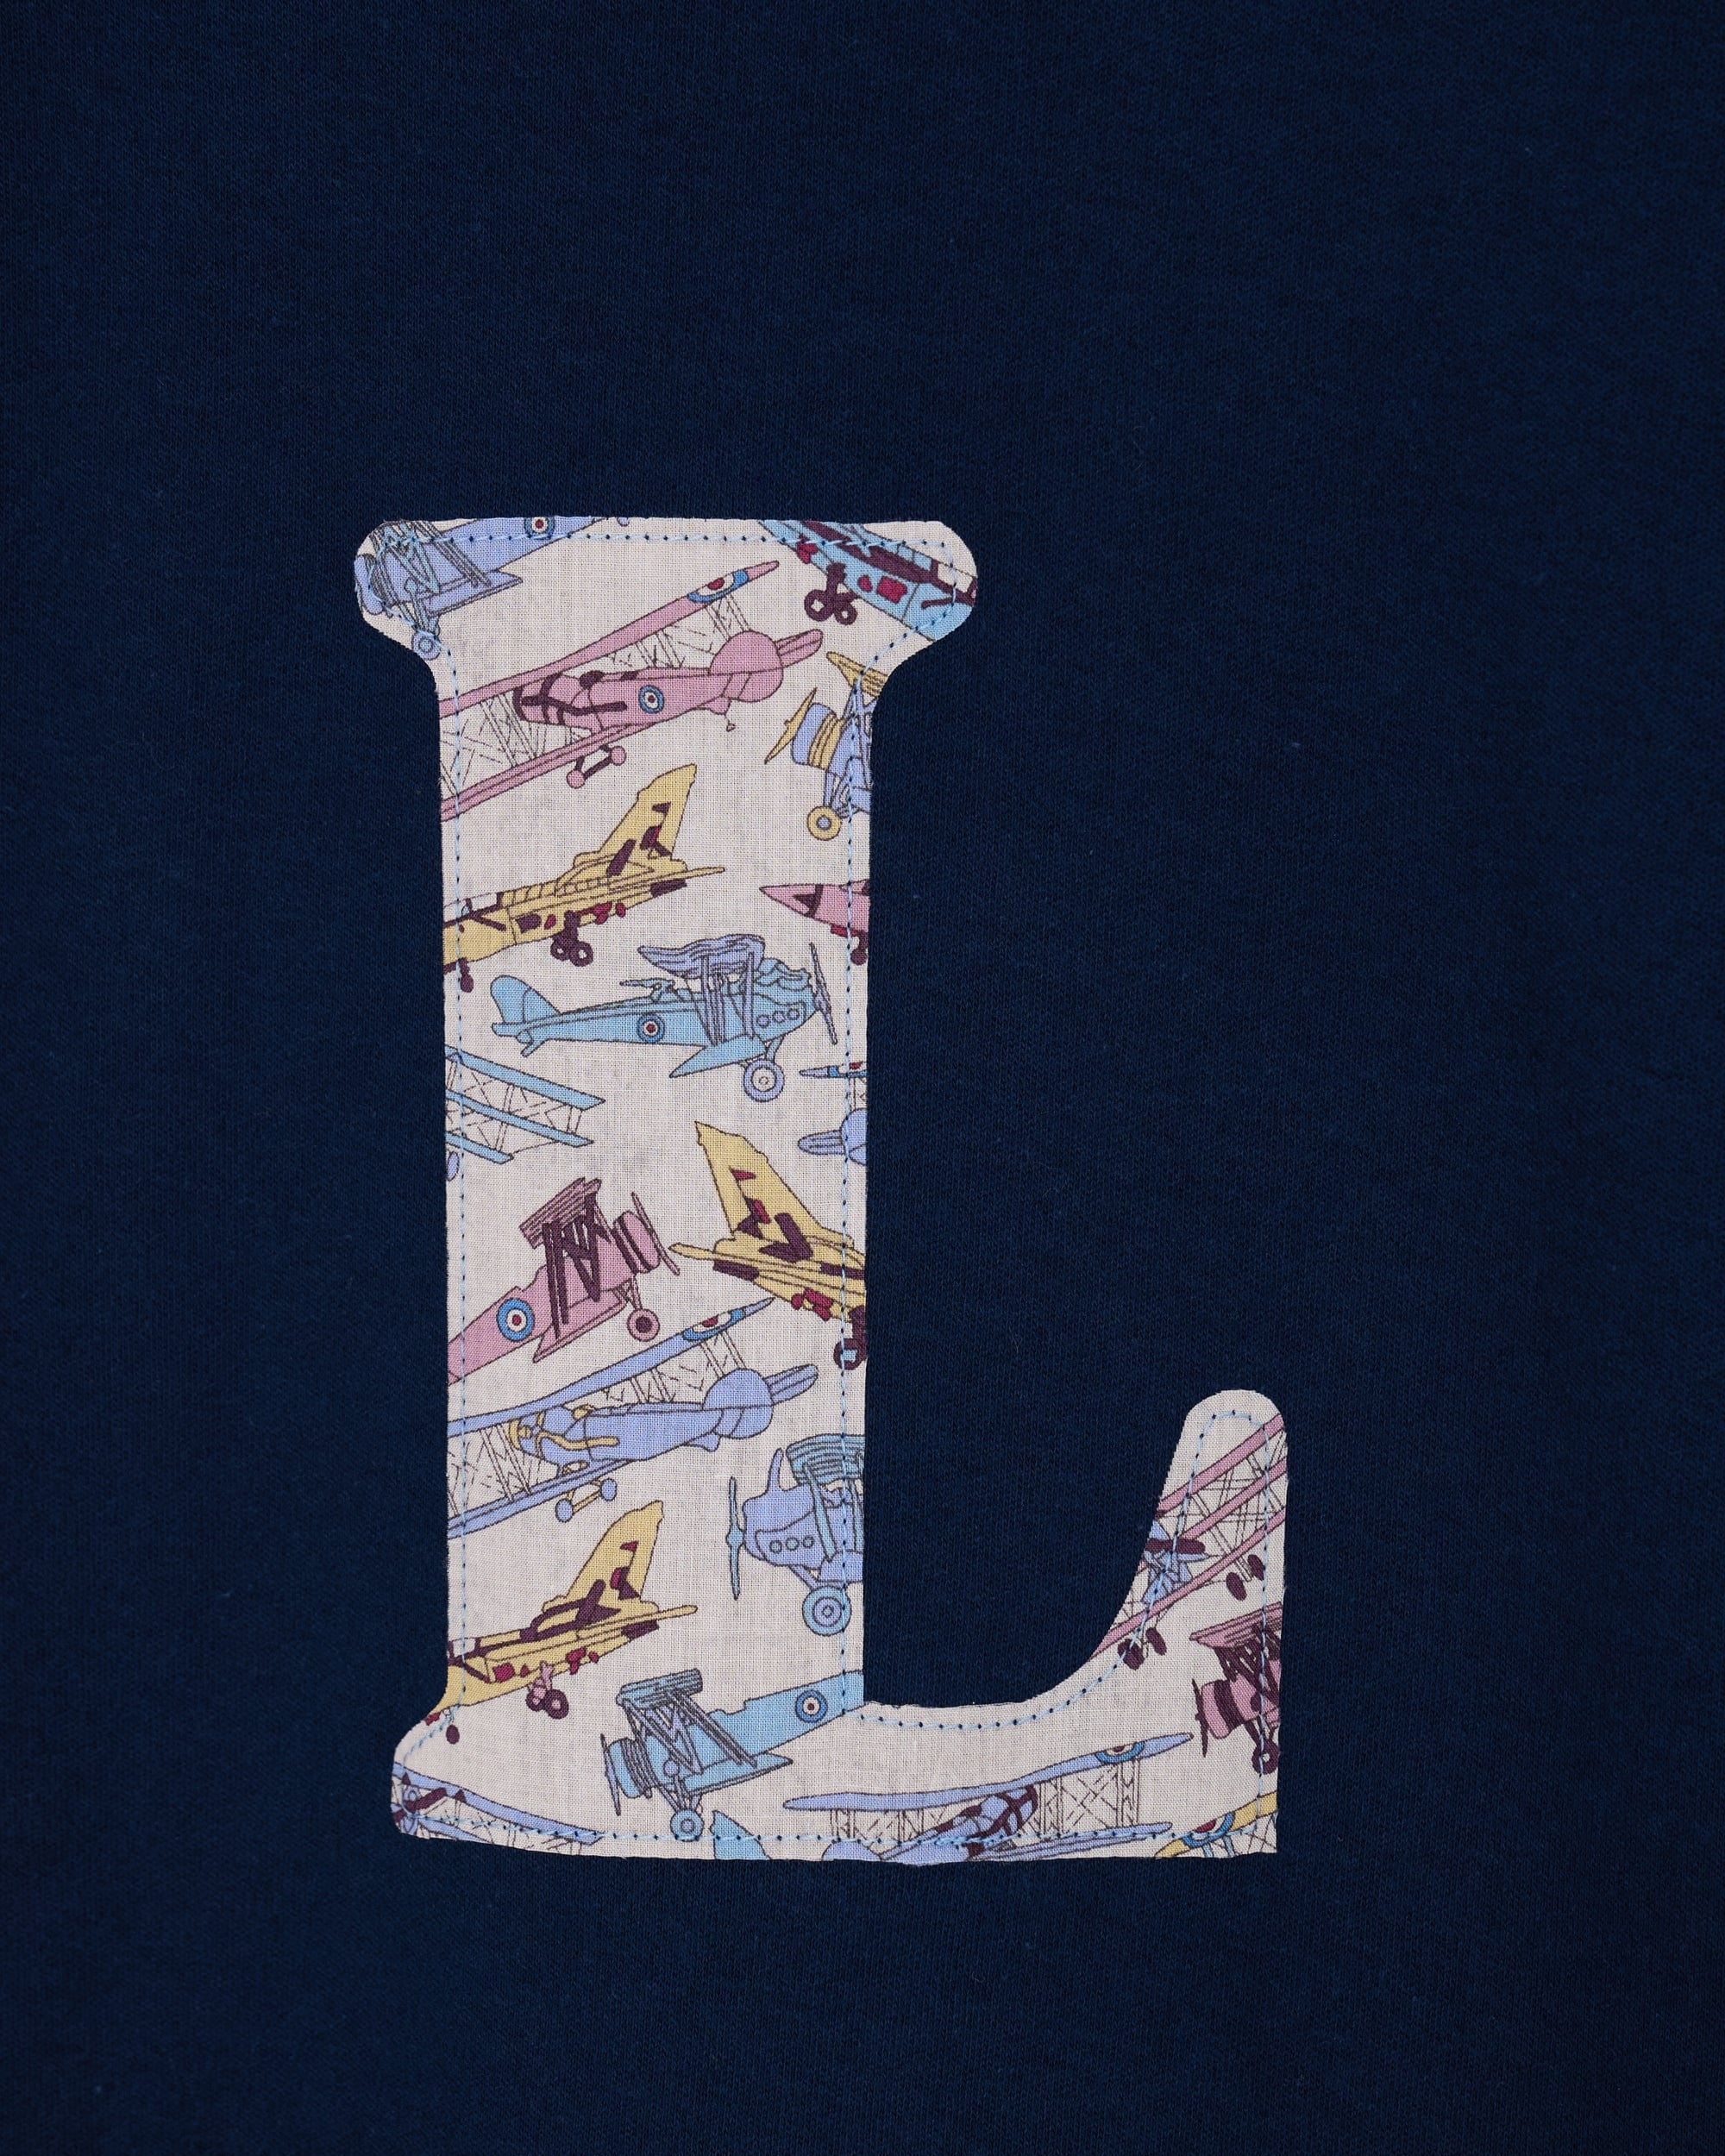 Magnificent Stanley Tee Personalised Navy T-Shirt in Tom's Jet Liberty Print